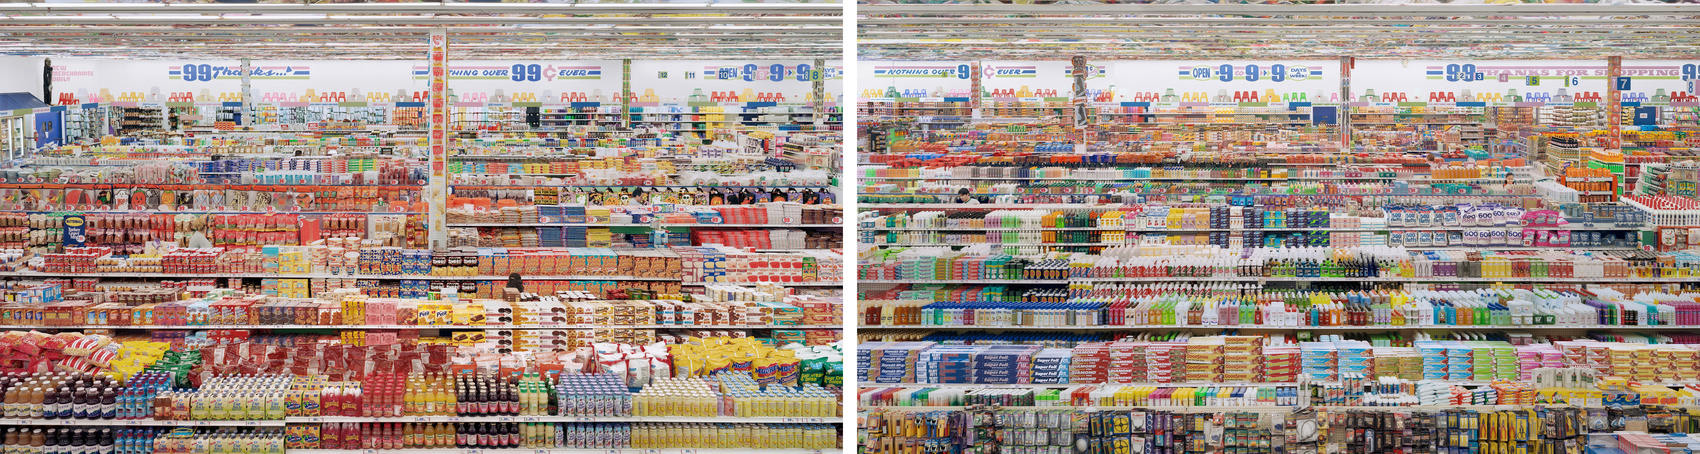 3 2001 99 Cent II Diptych AndreasGursky iFocus